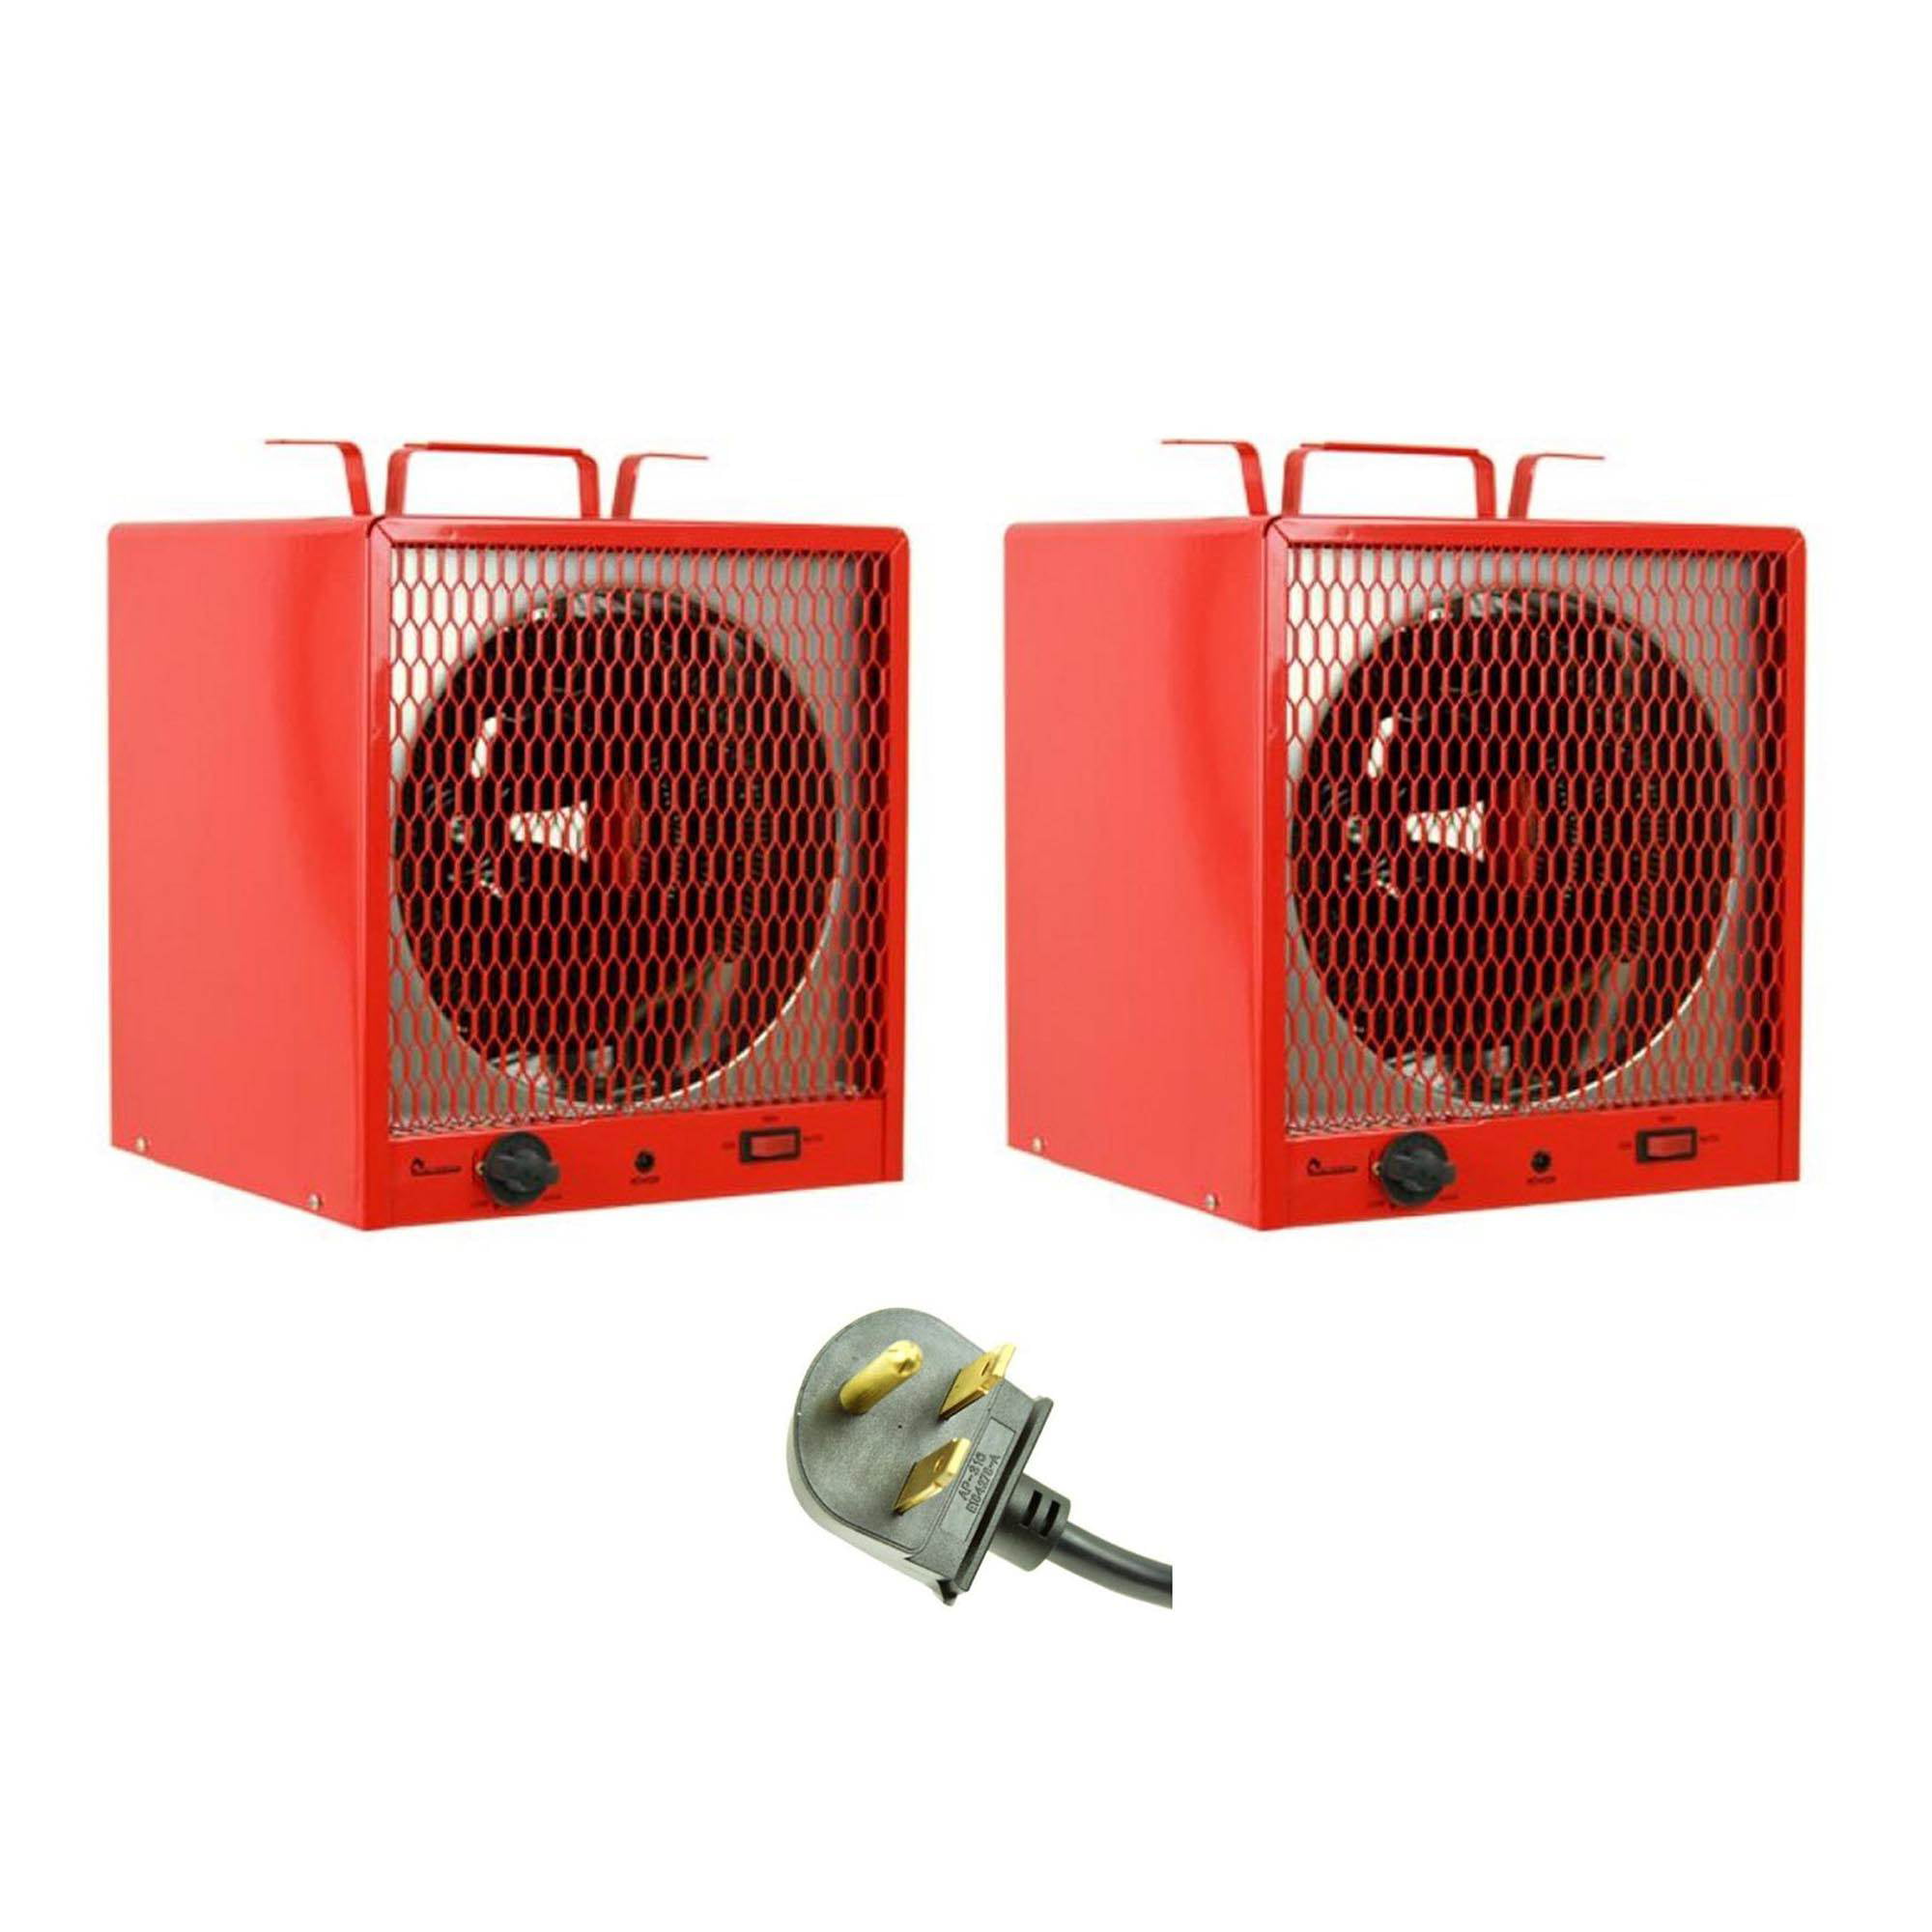 Warm In The Area With Infrared Heater